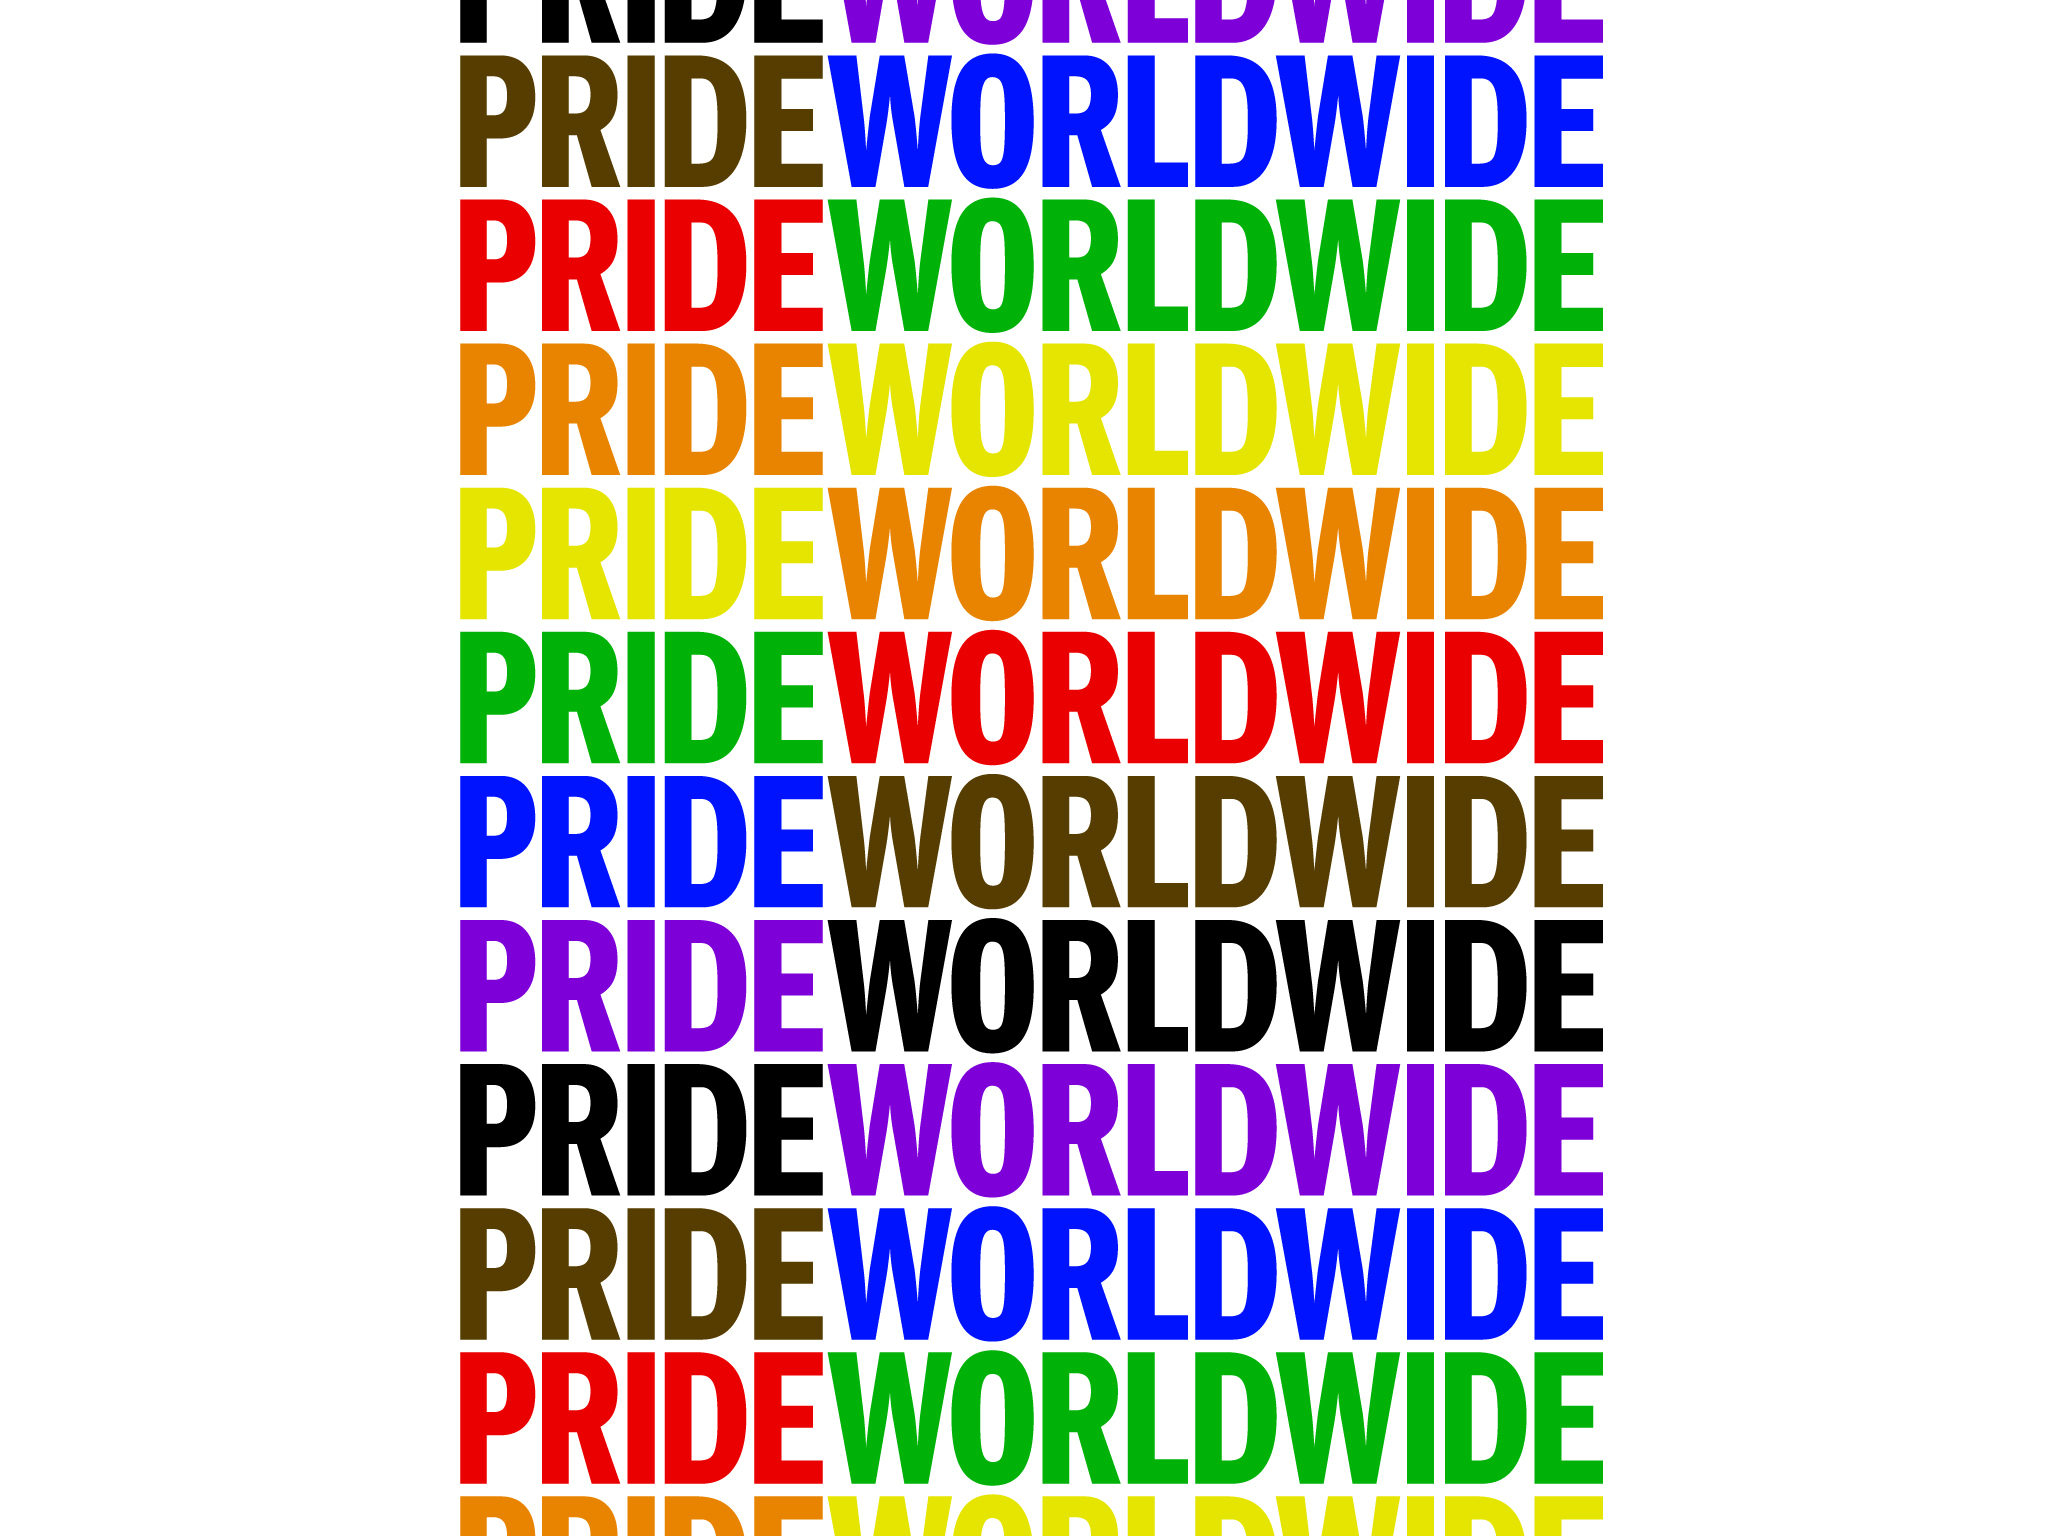 We Re Partnering With Global Pride For Our First Ever Prideworldwide Campaign